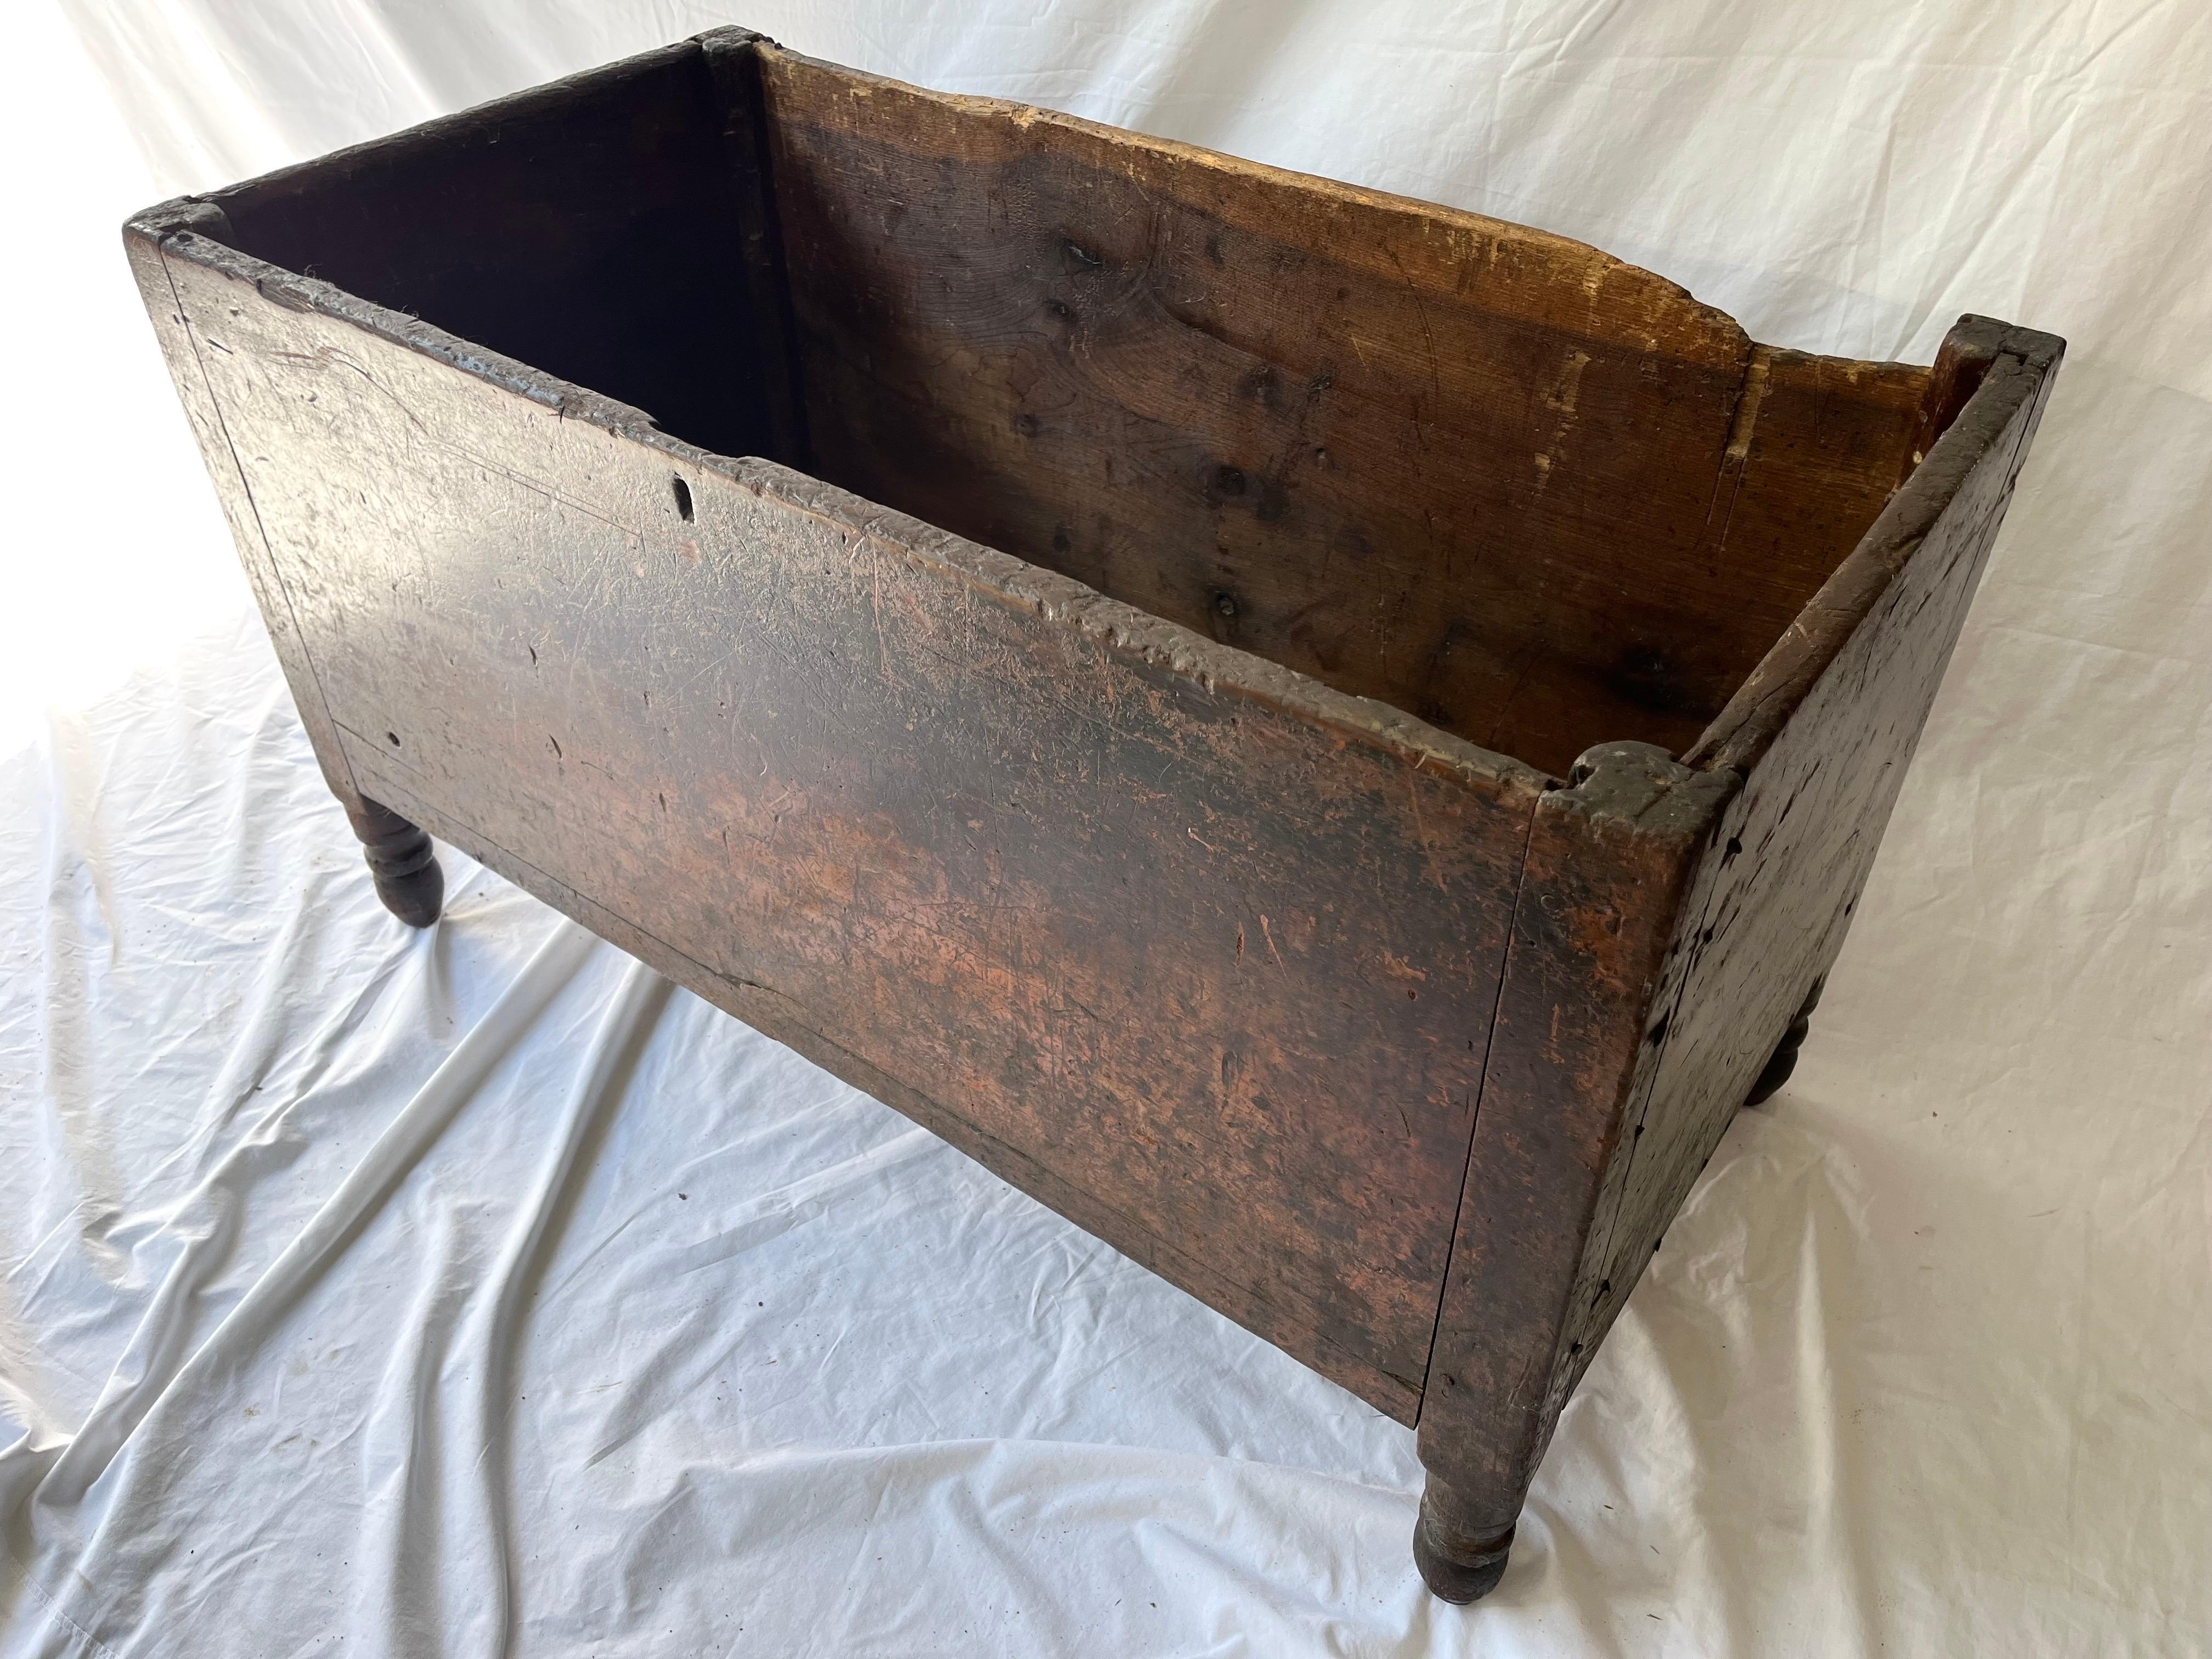 Yes. You read that correctly. This is an antique American mid to late 19th century Tennessee hand built primitive blanket chest relic which served as a trough for a cow. I'll be the first (maybe) to tell you that antique dealers can spin a yarn. The